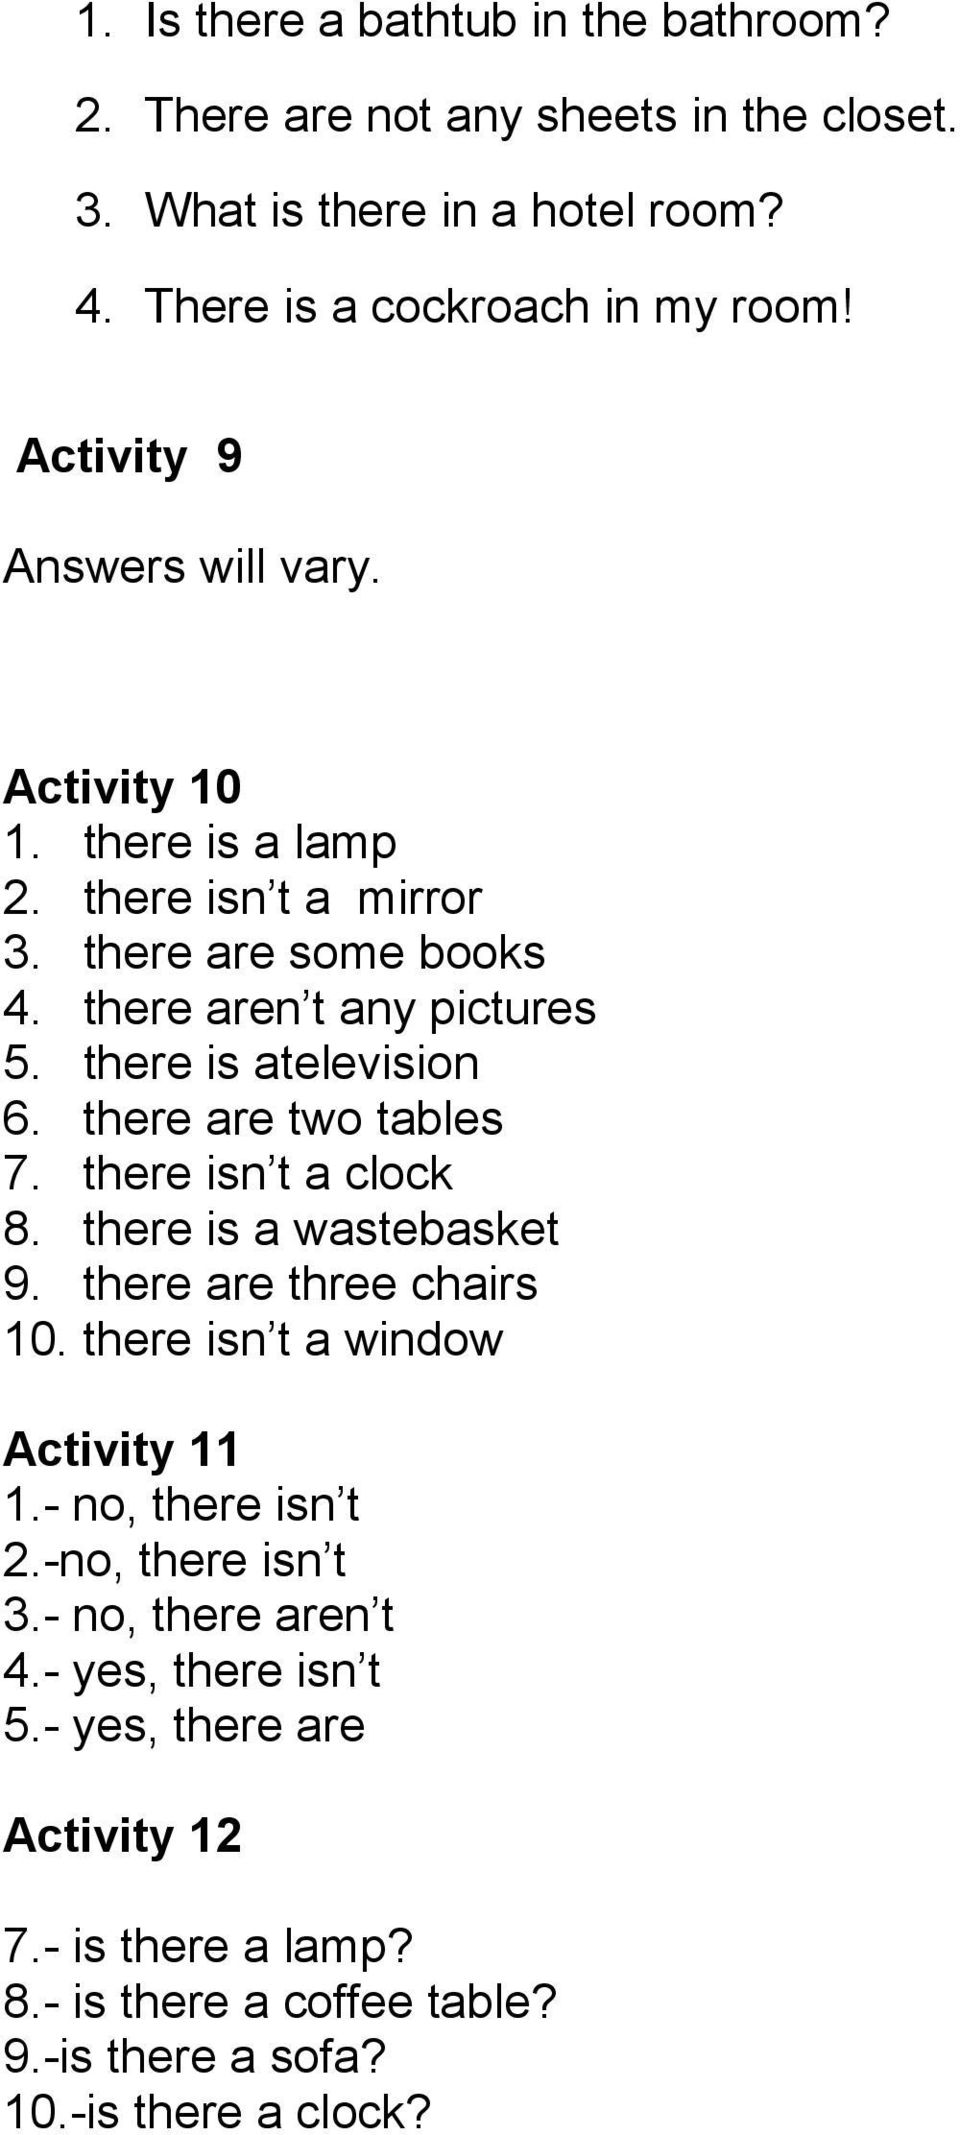 there are two tables 7. there isn t a clock 8. there is a wastebasket 9. there are three chairs 10. there isn t a window Activity 11 1.- no, there isn t 2.